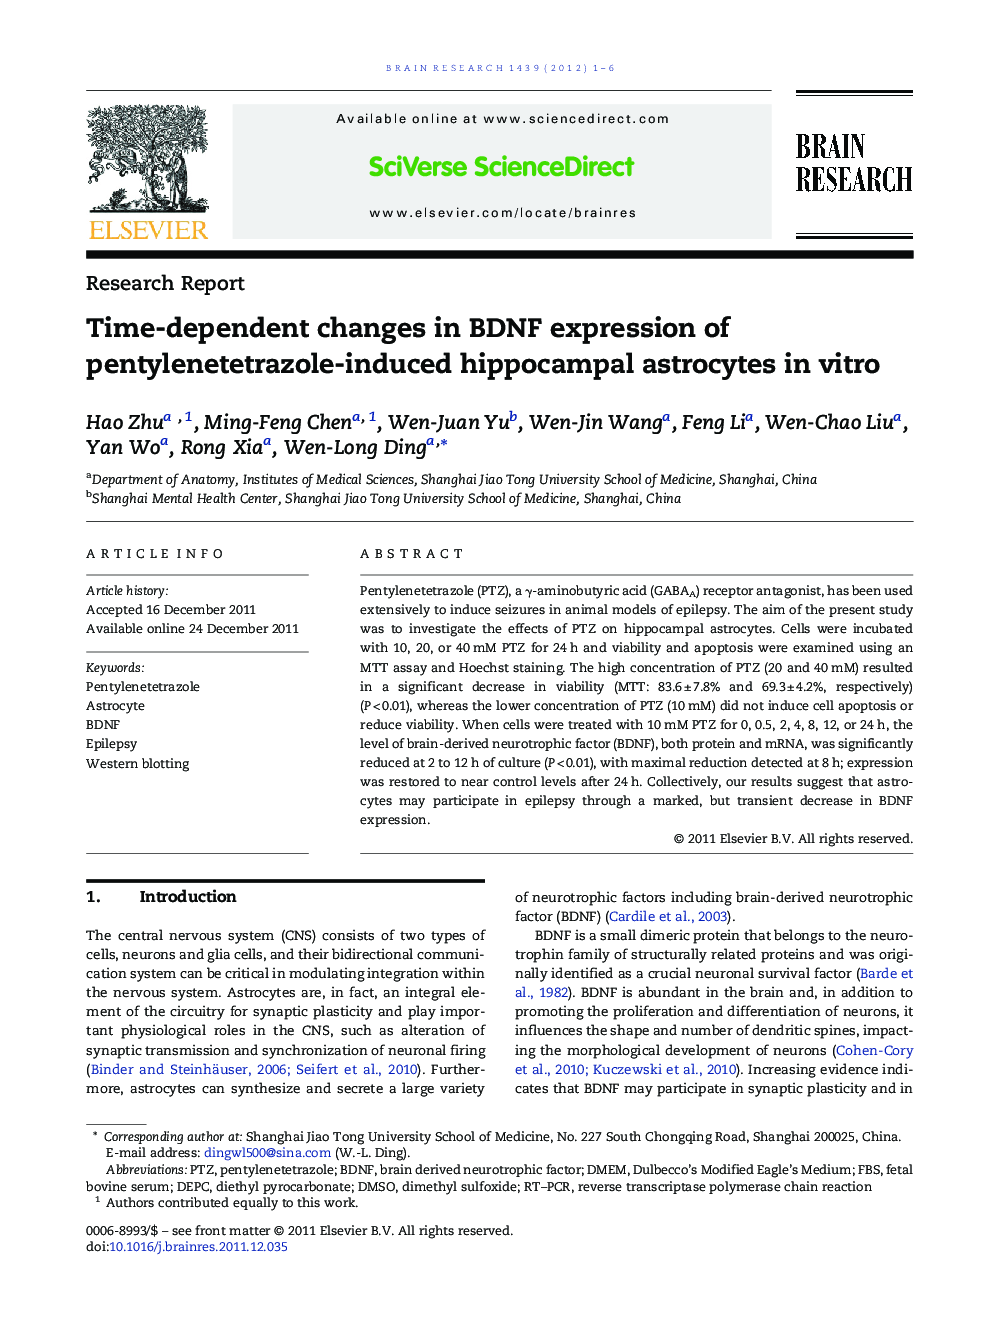 Time-dependent changes in BDNF expression of pentylenetetrazole-induced hippocampal astrocytes in vitro